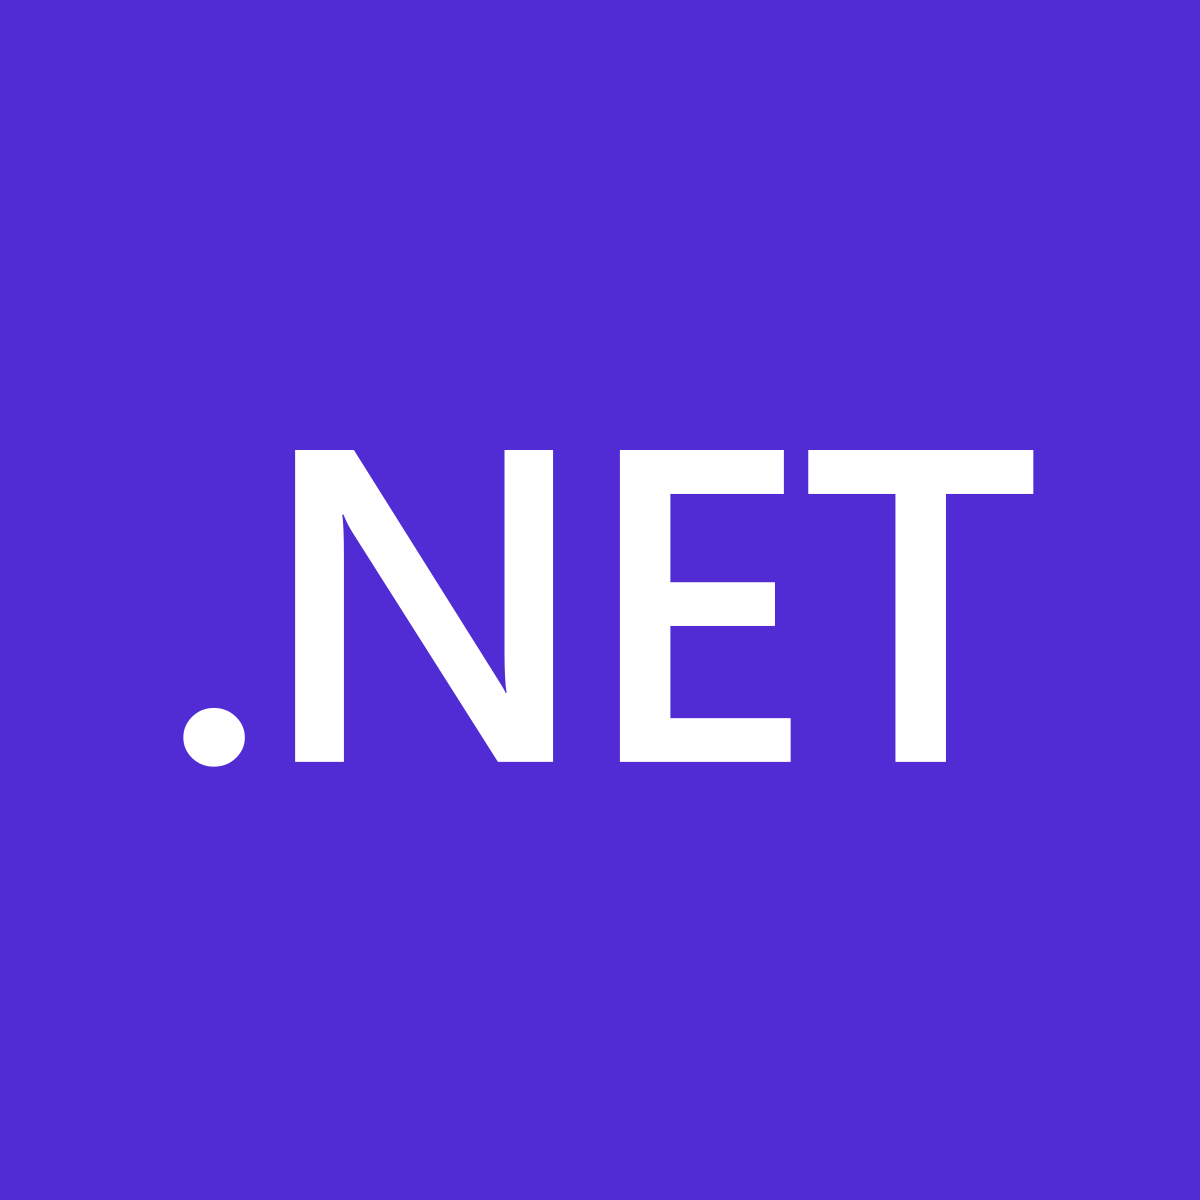 Why Is the Latest Version of .NET So Much Better Than Older Versions?